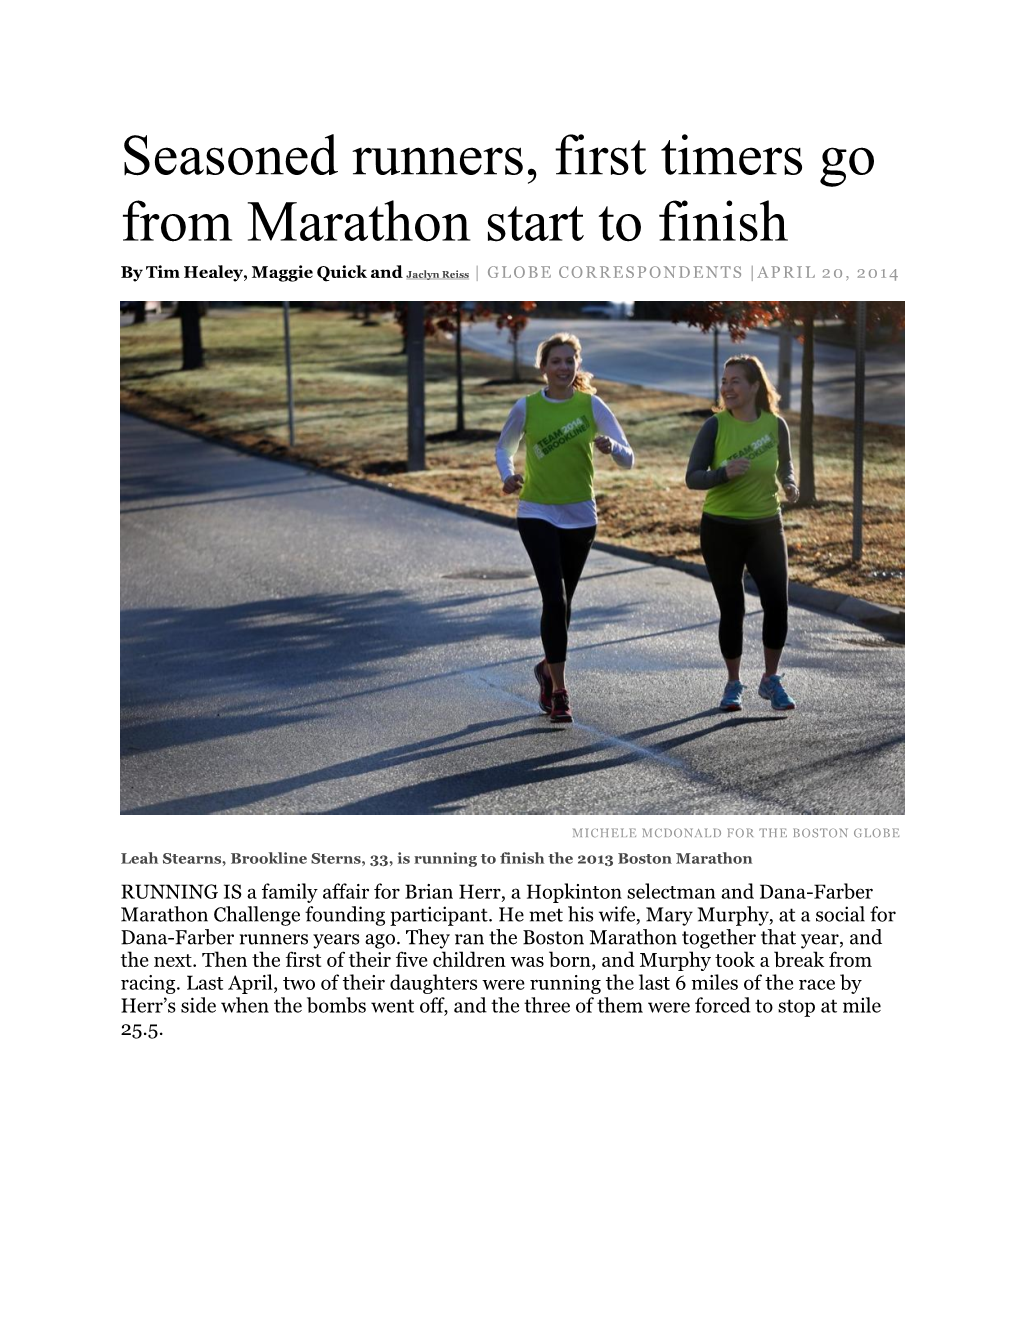 Seasoned Runners, First Timers Go from Marathon Start to Finish